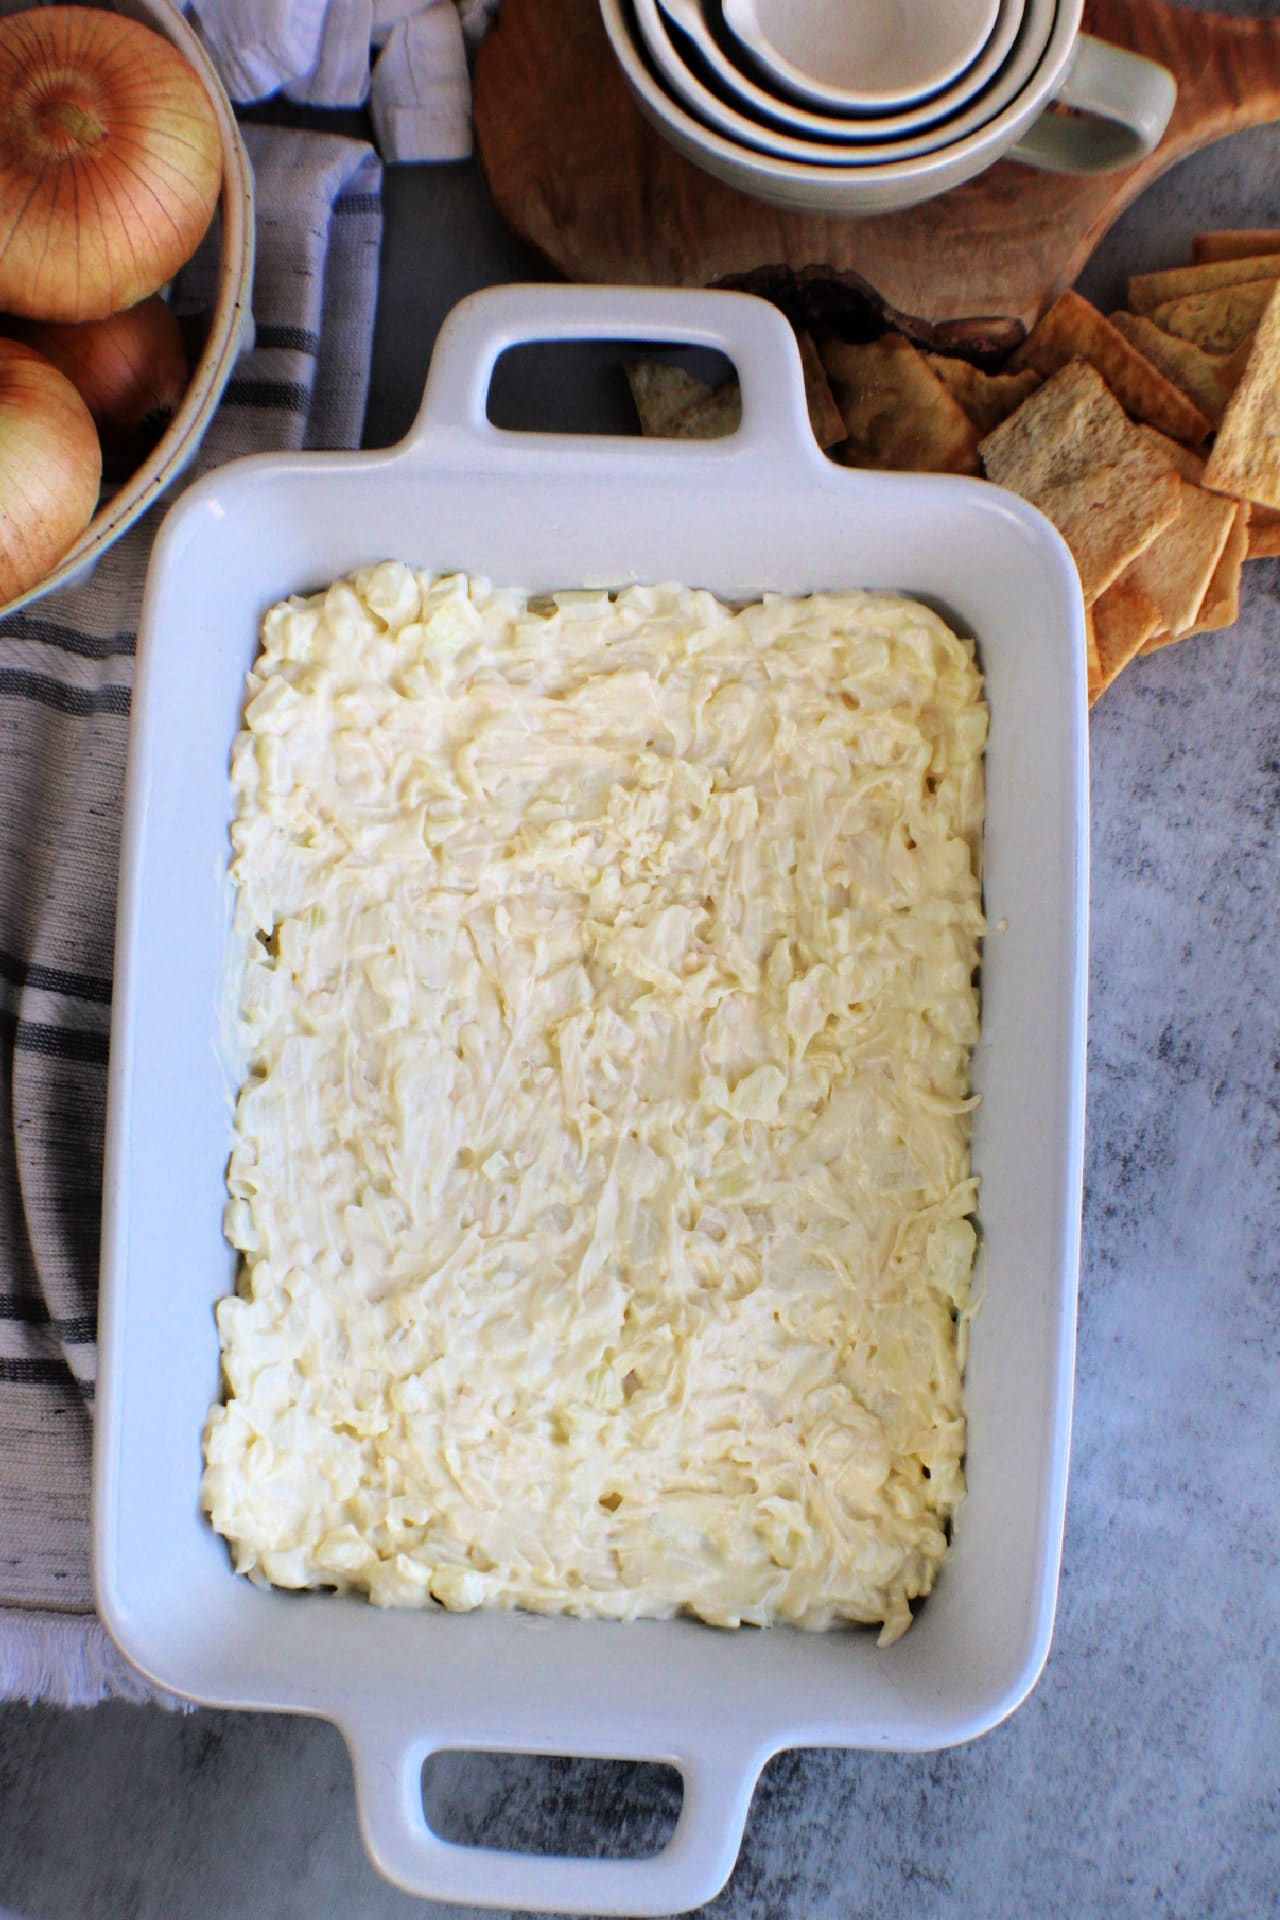 Hot Onion Dip spread into a baking dish